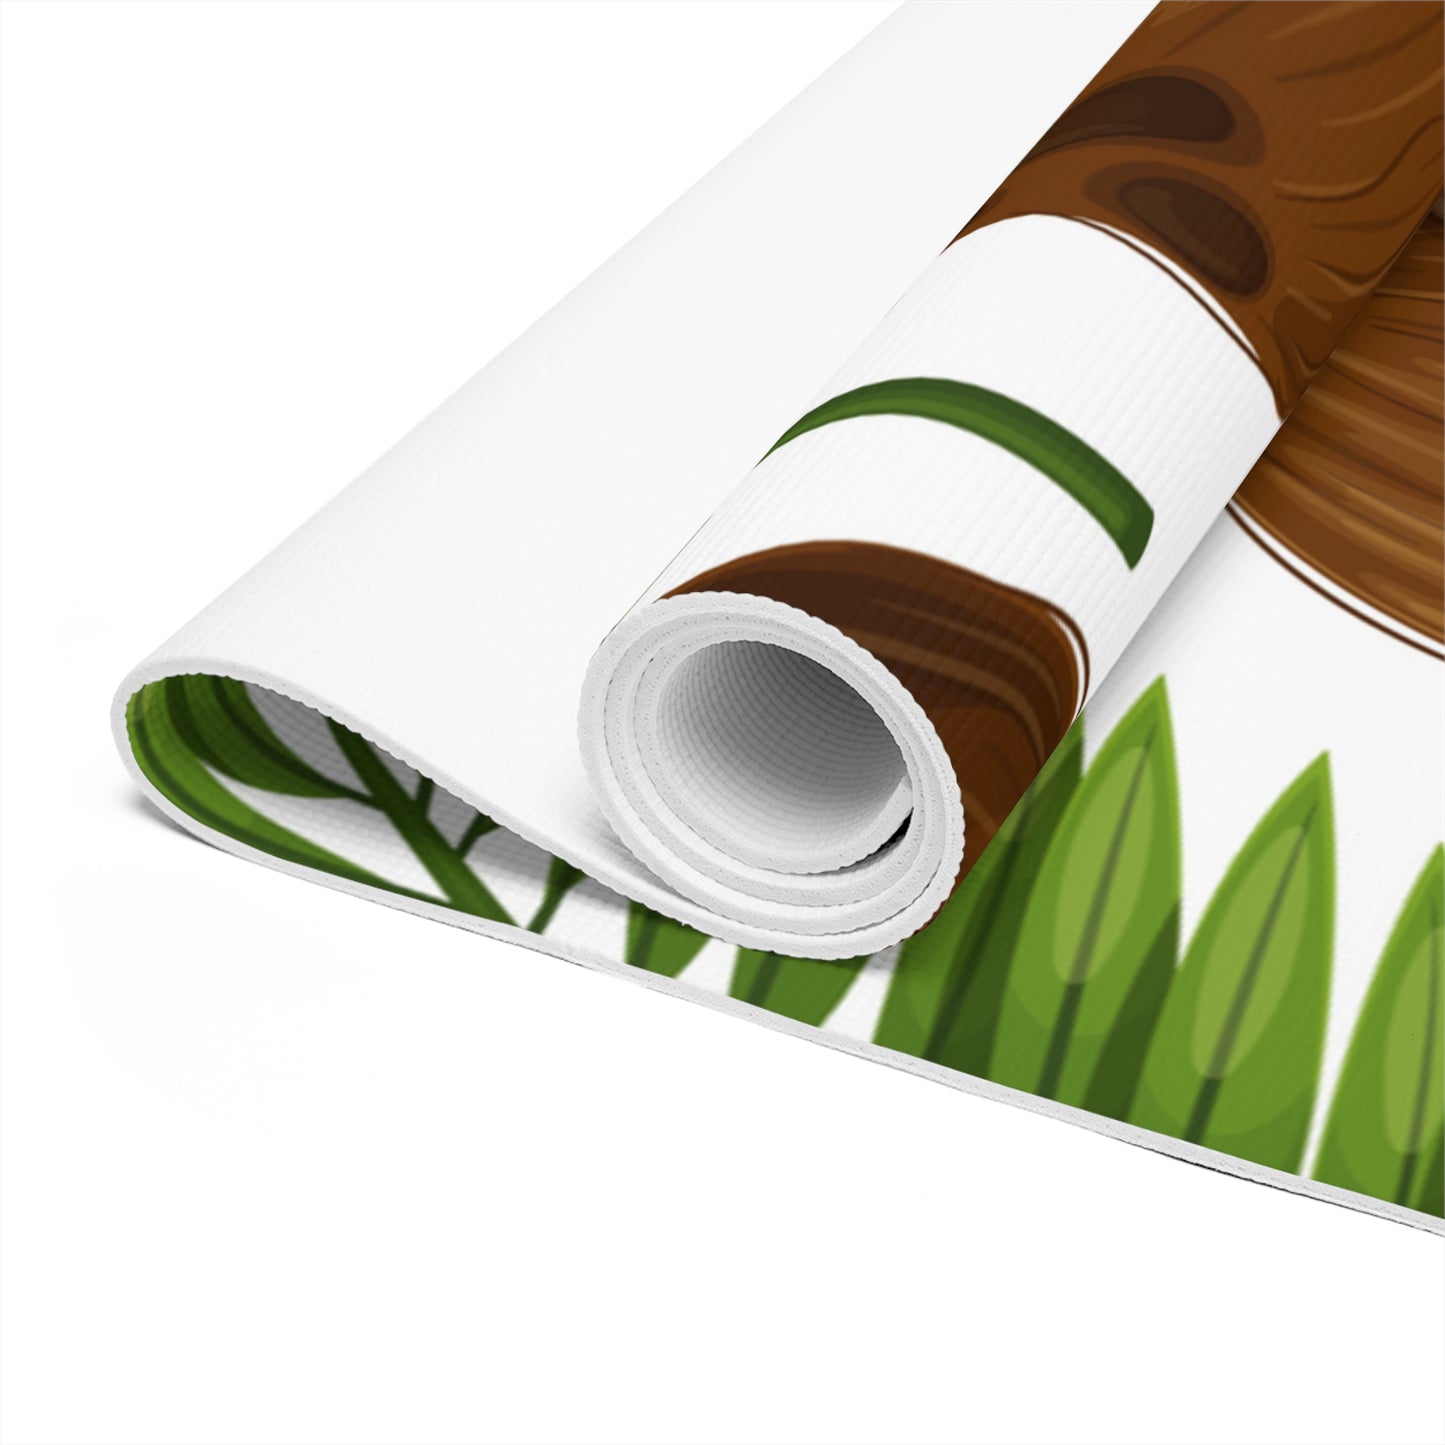 Coconuts Foam Yoga Mat, Foam Material, Lightweight, and Cushions You From Impacts, 24" x 72" x .25"